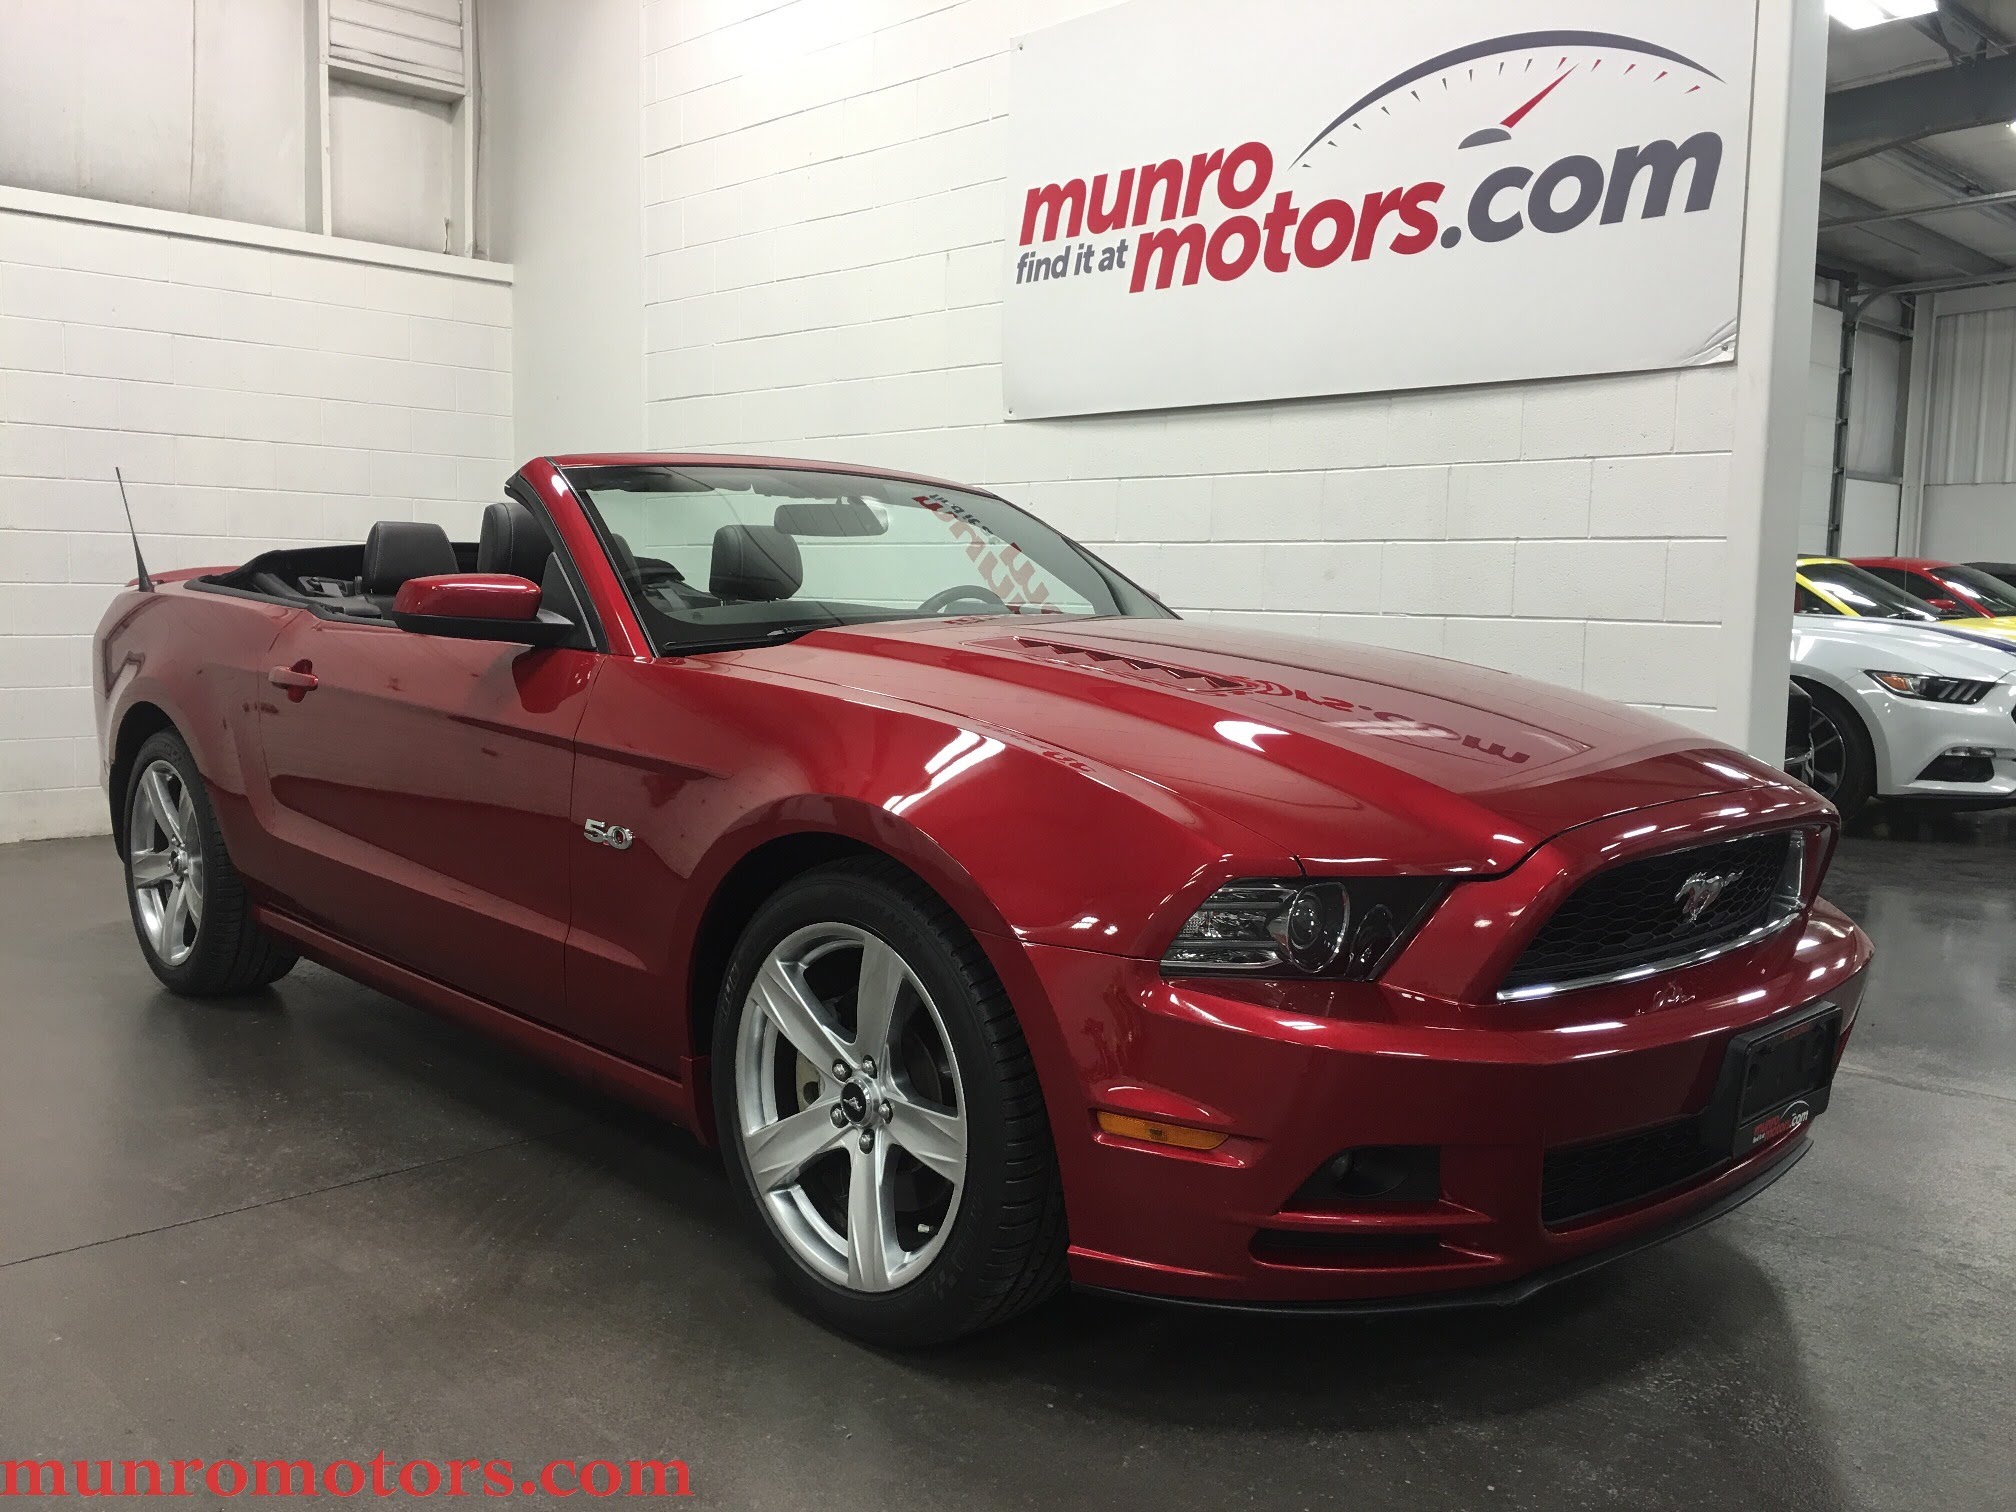 Burgundy ford mustang photo